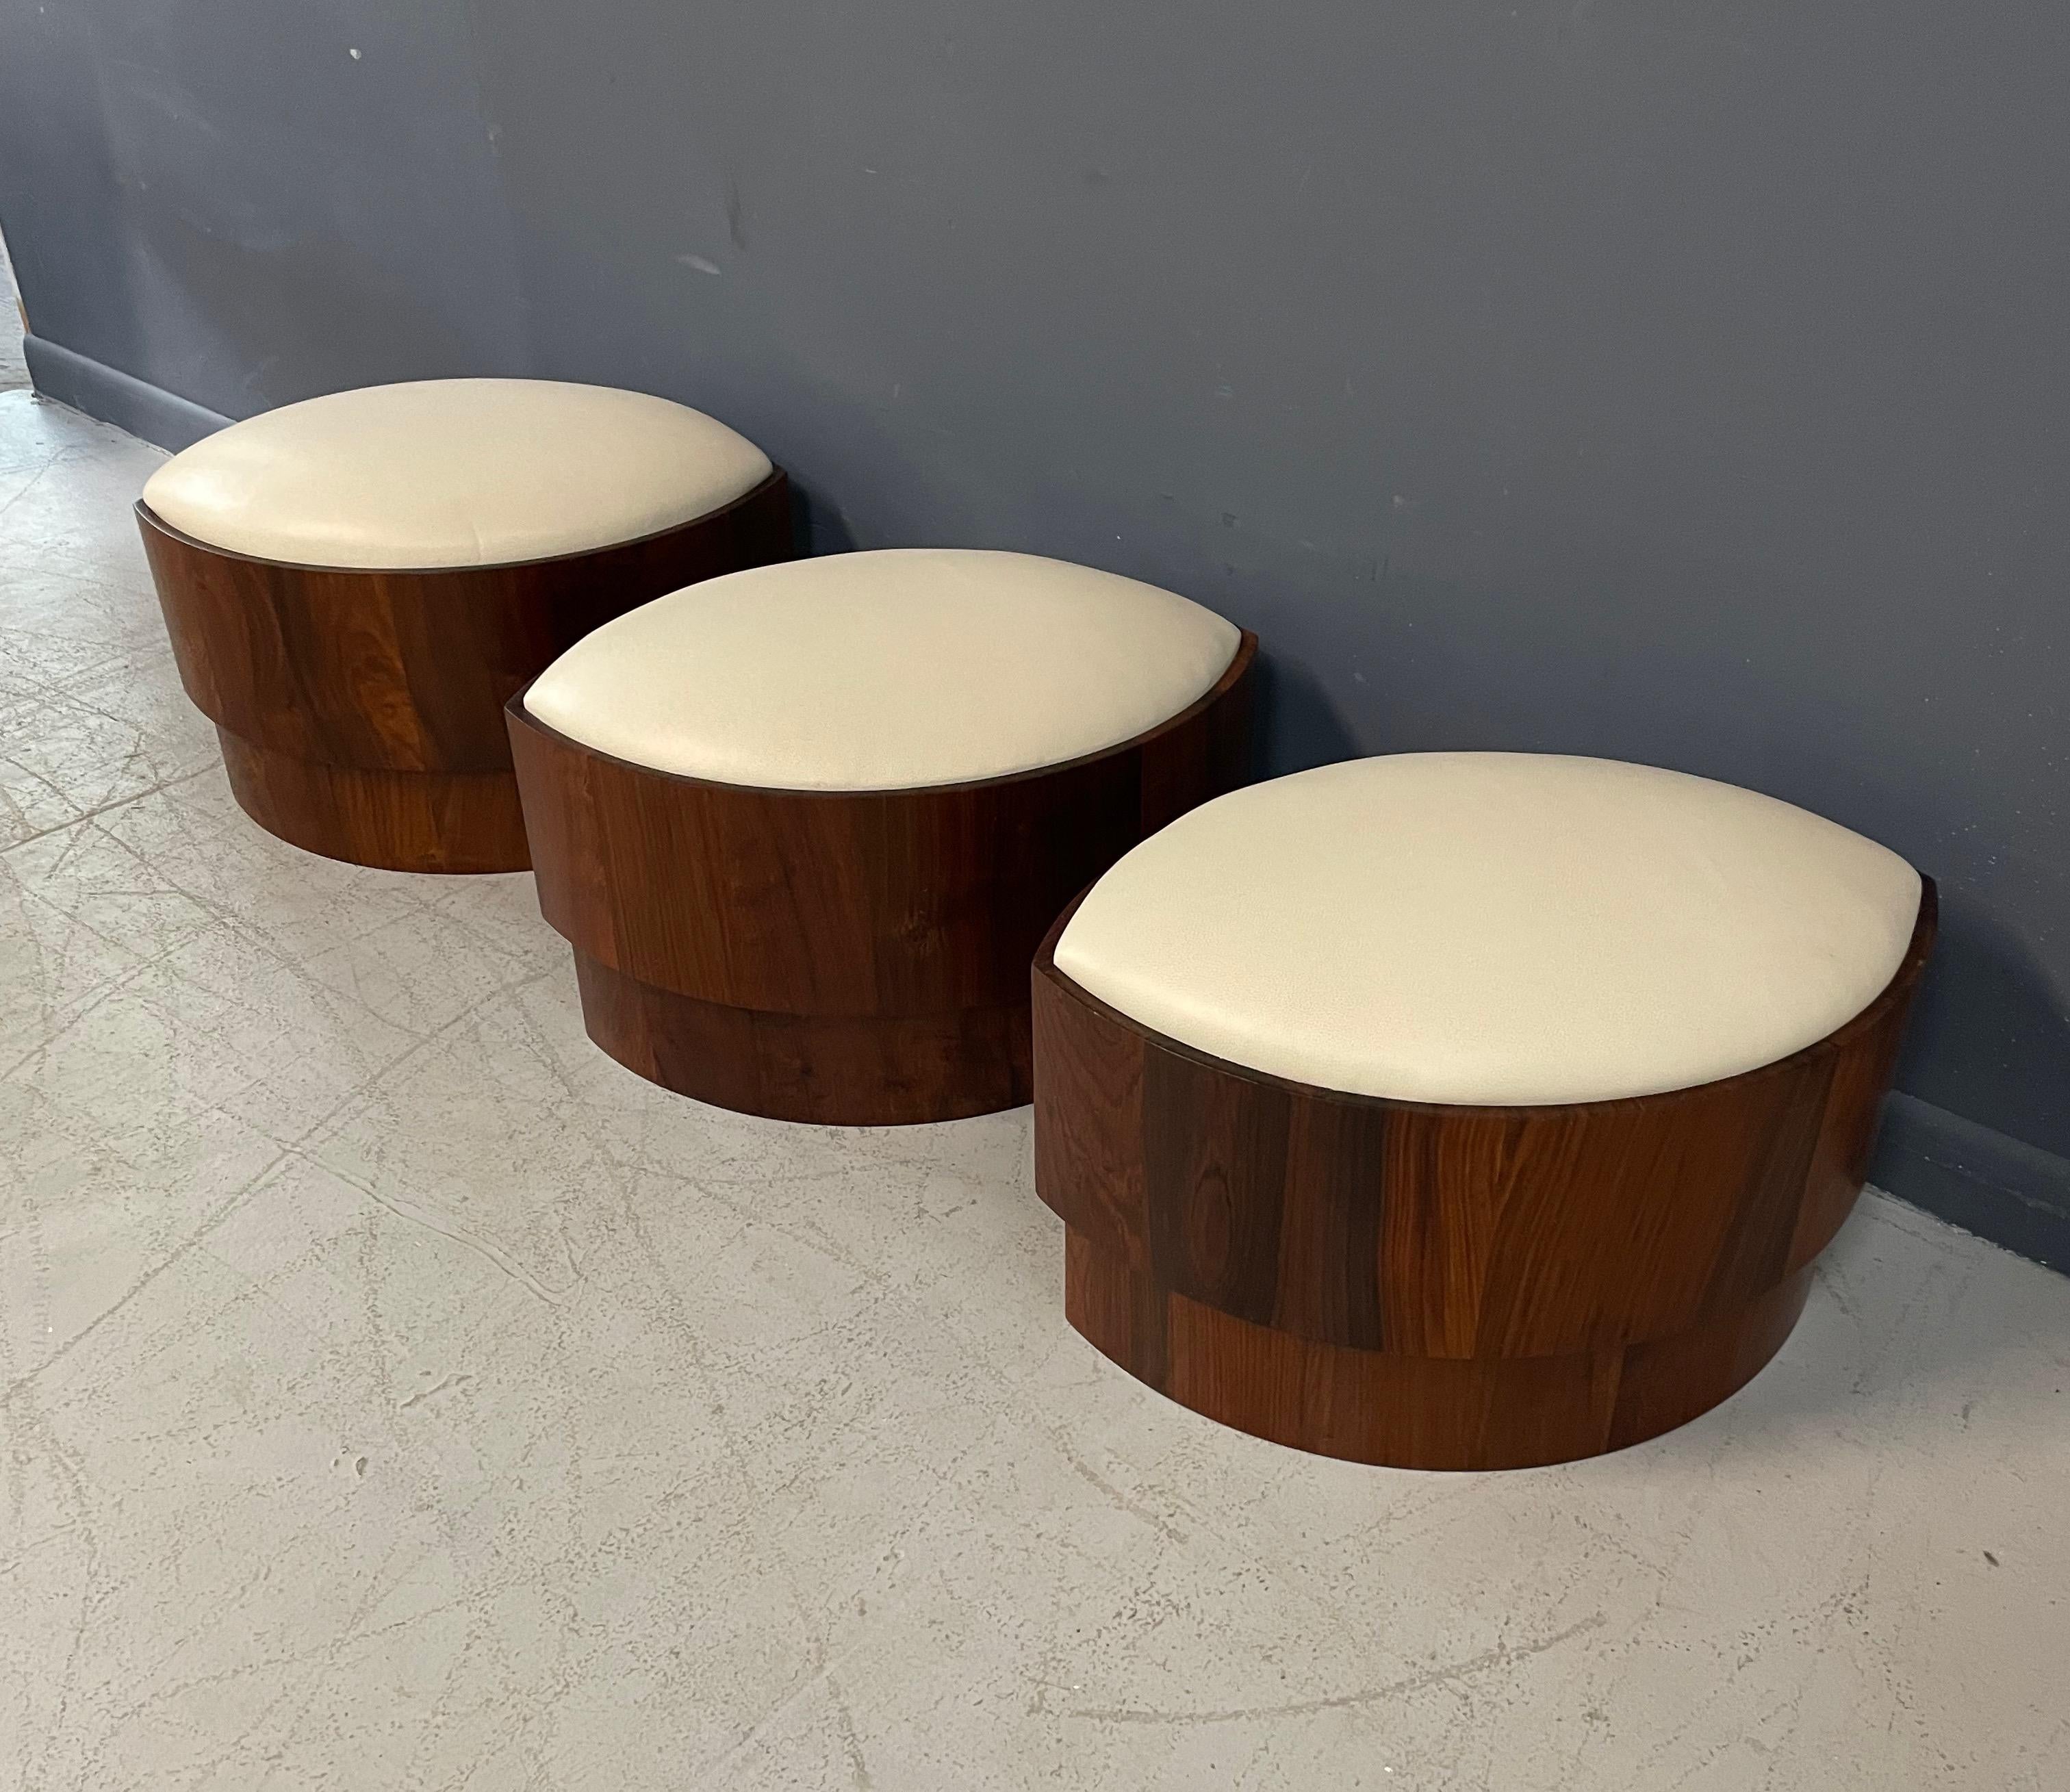 This set of leather topped ottomans or stools is constructed of beautifully grained wood with a padded top wrapped in soft buttery cream colored leather. The tops come off to reveal storage inside.